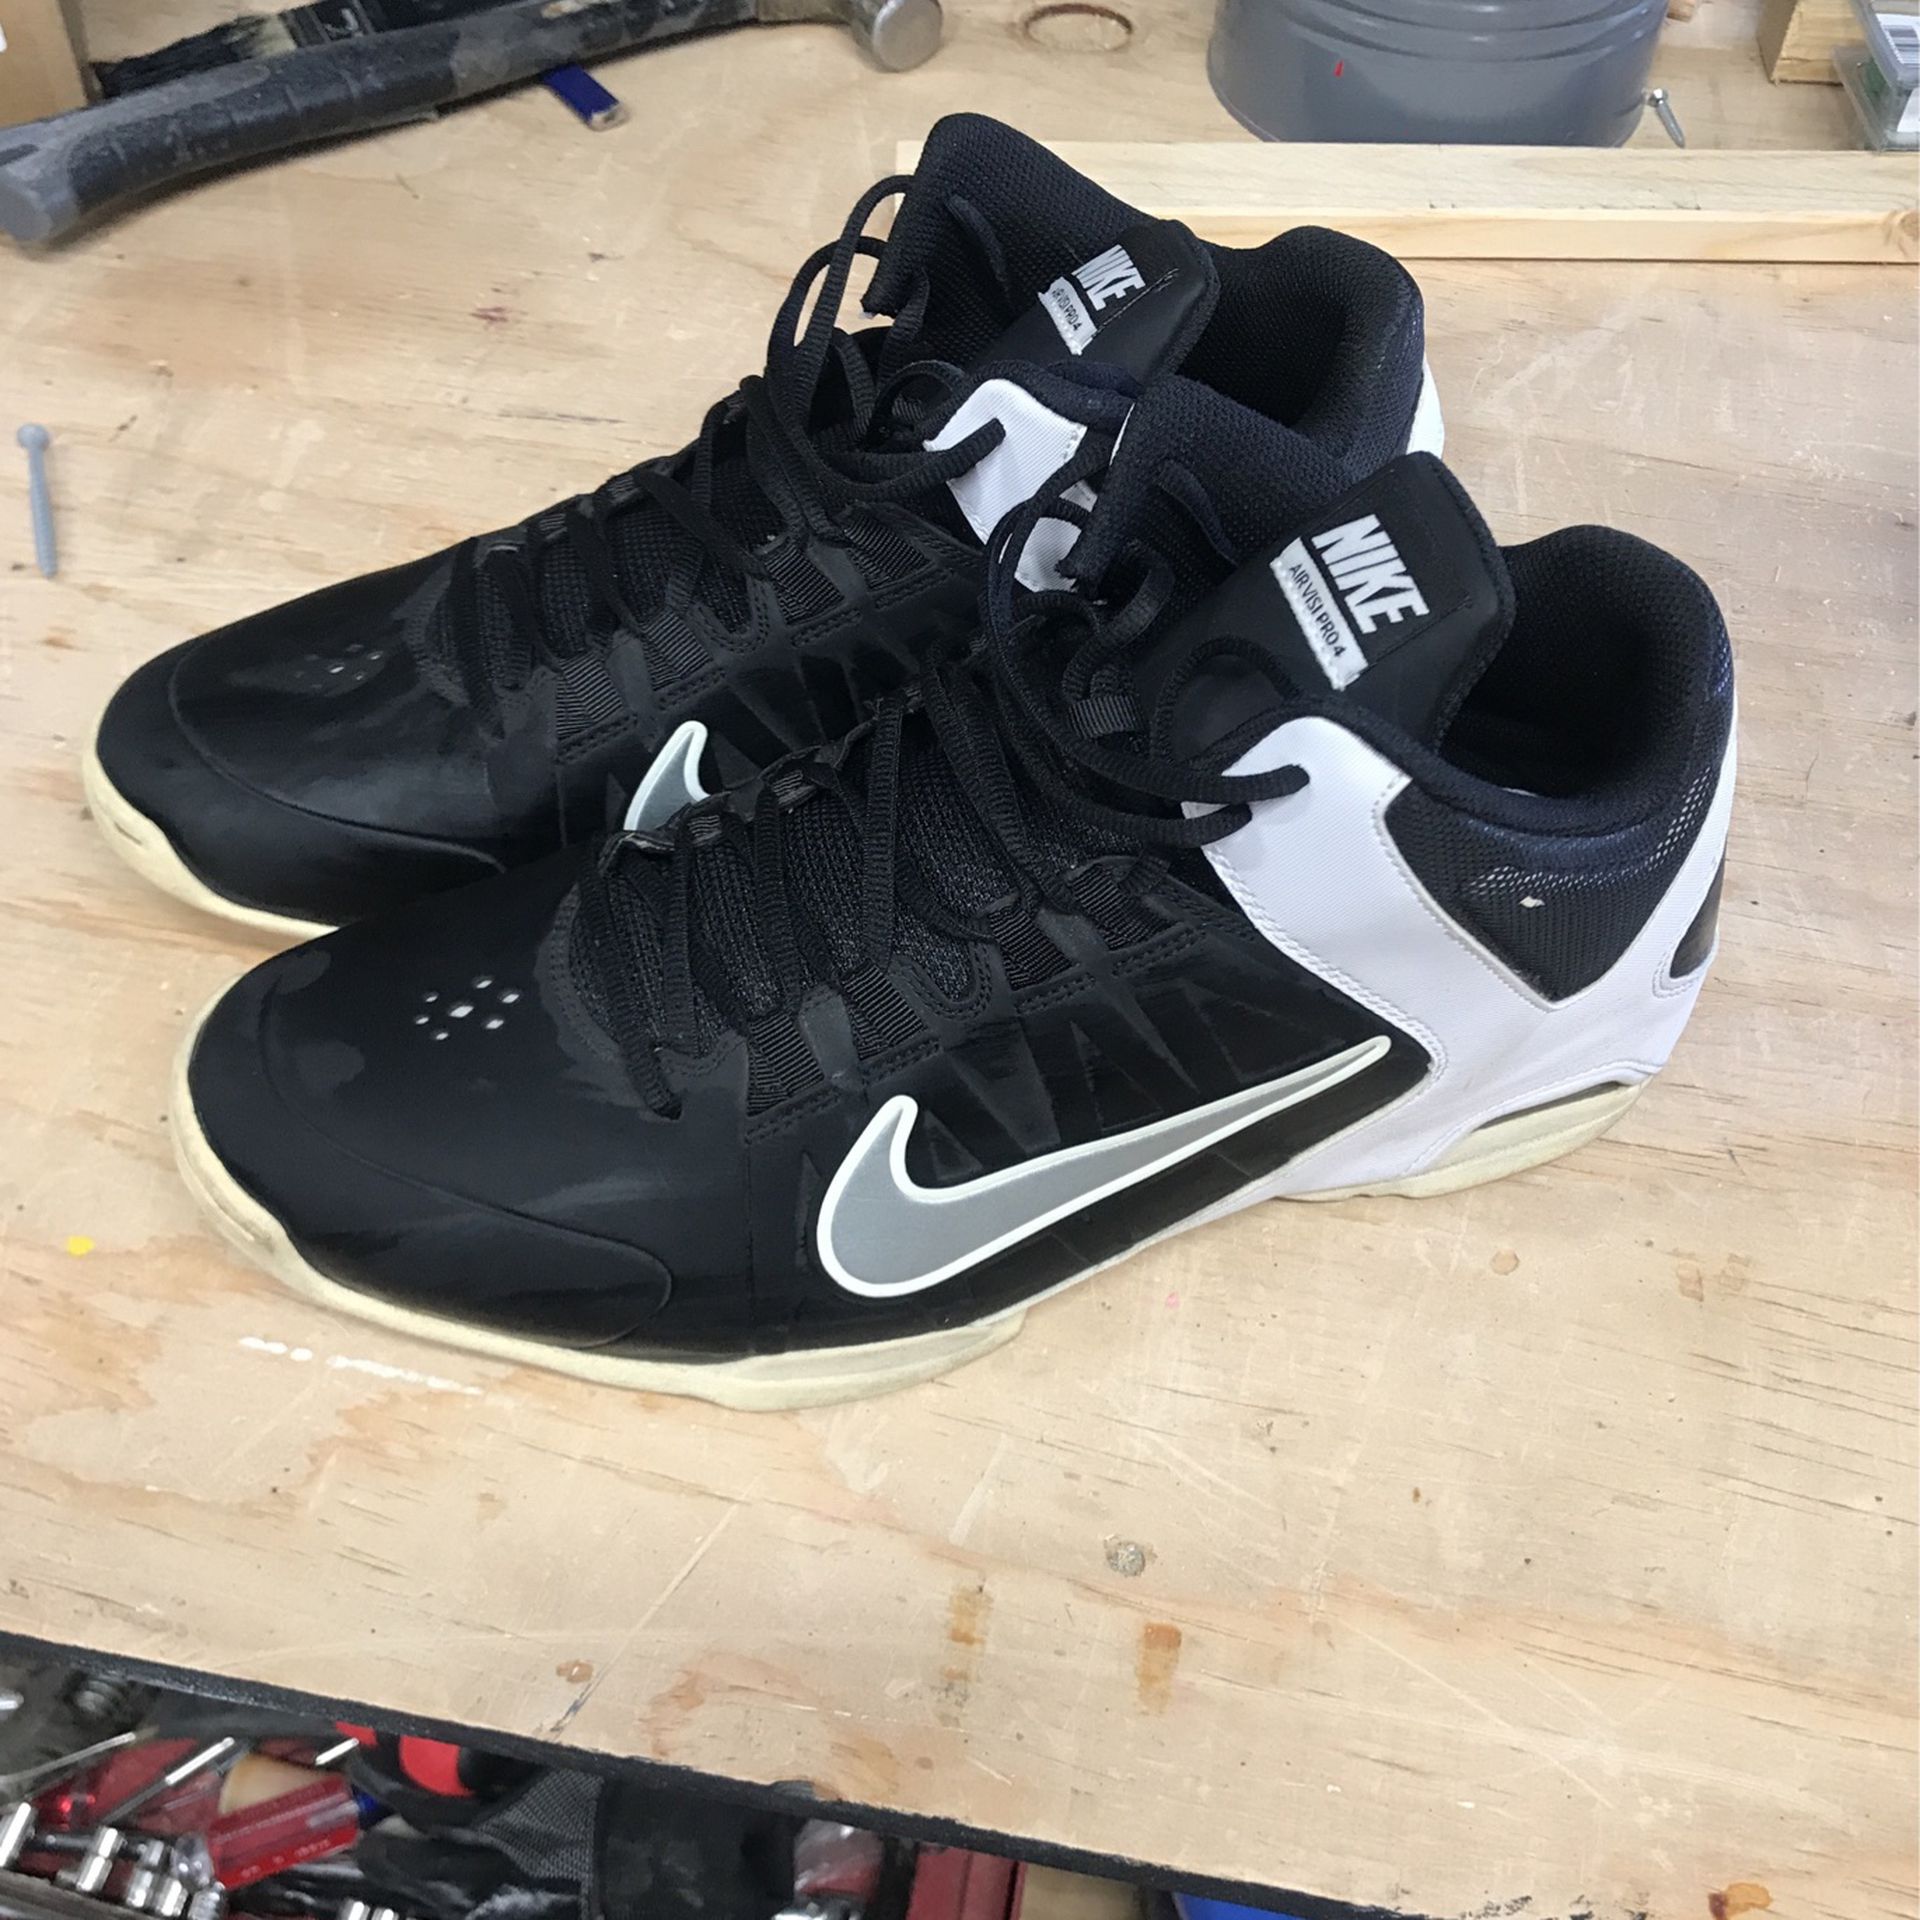 Nike Air Visi Pro 4 Shoes Size 14